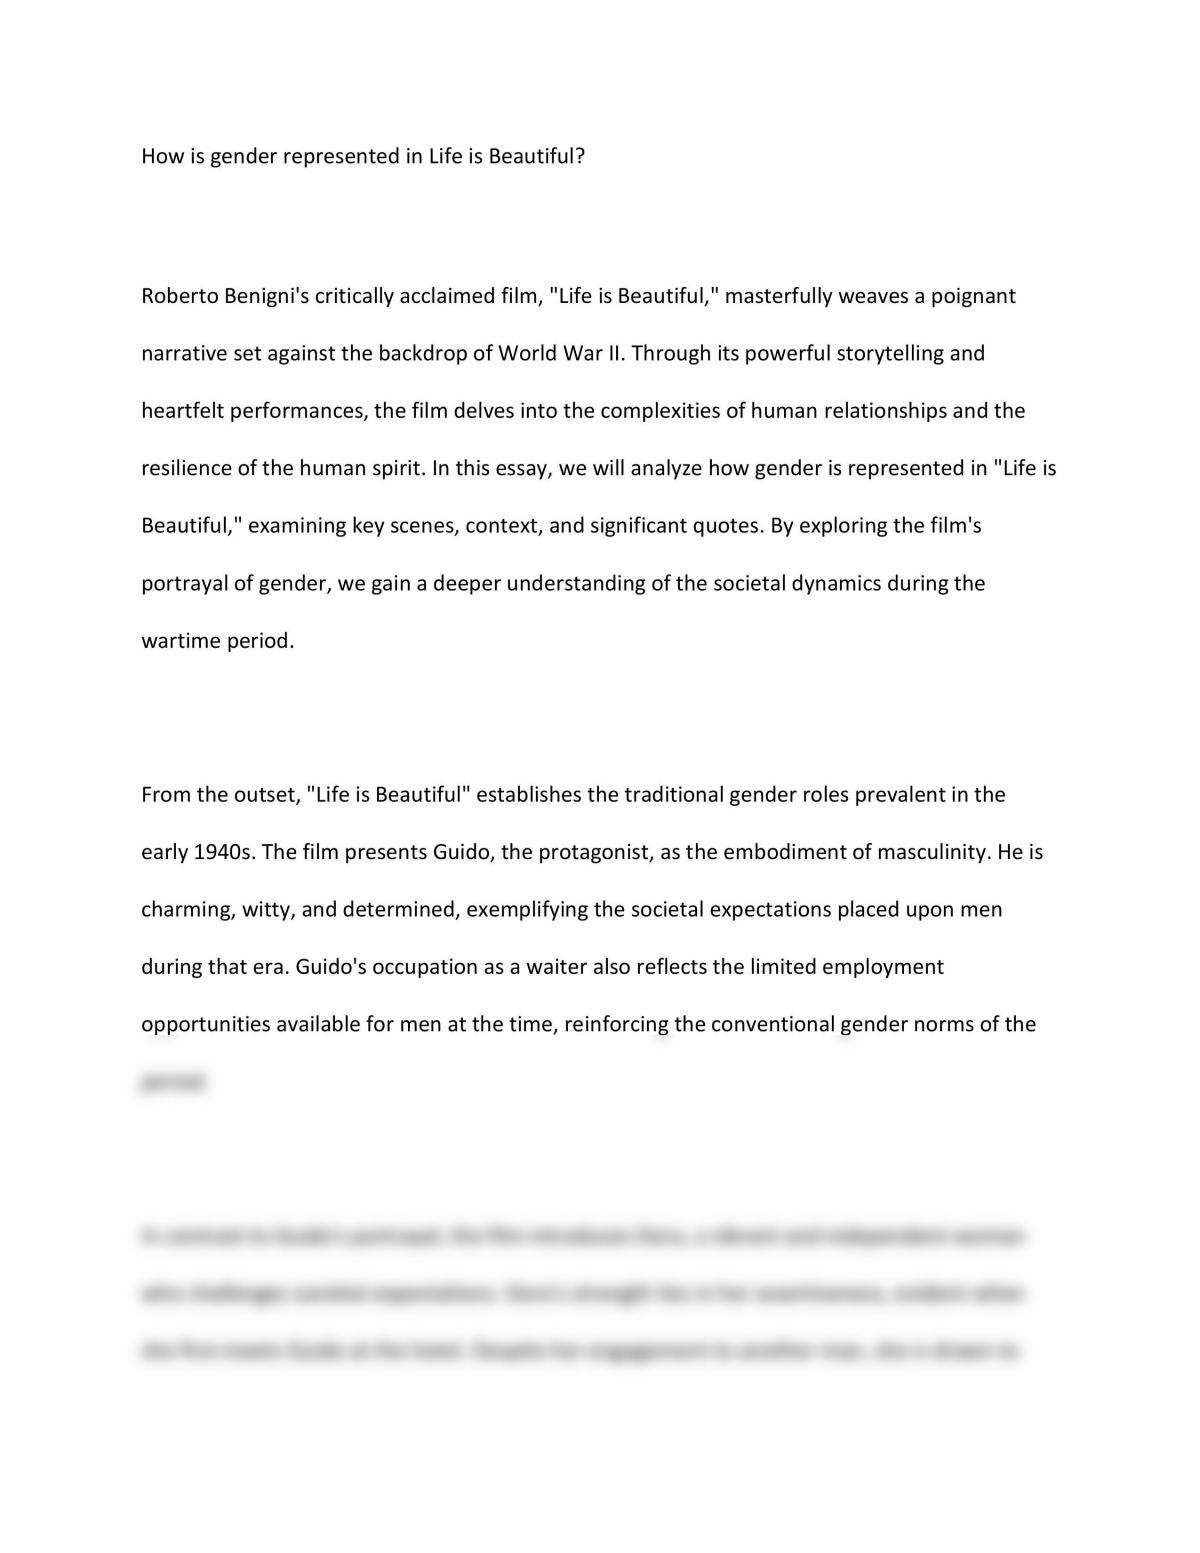 An Essay on Gender in Life Is Beautiful - Page 1